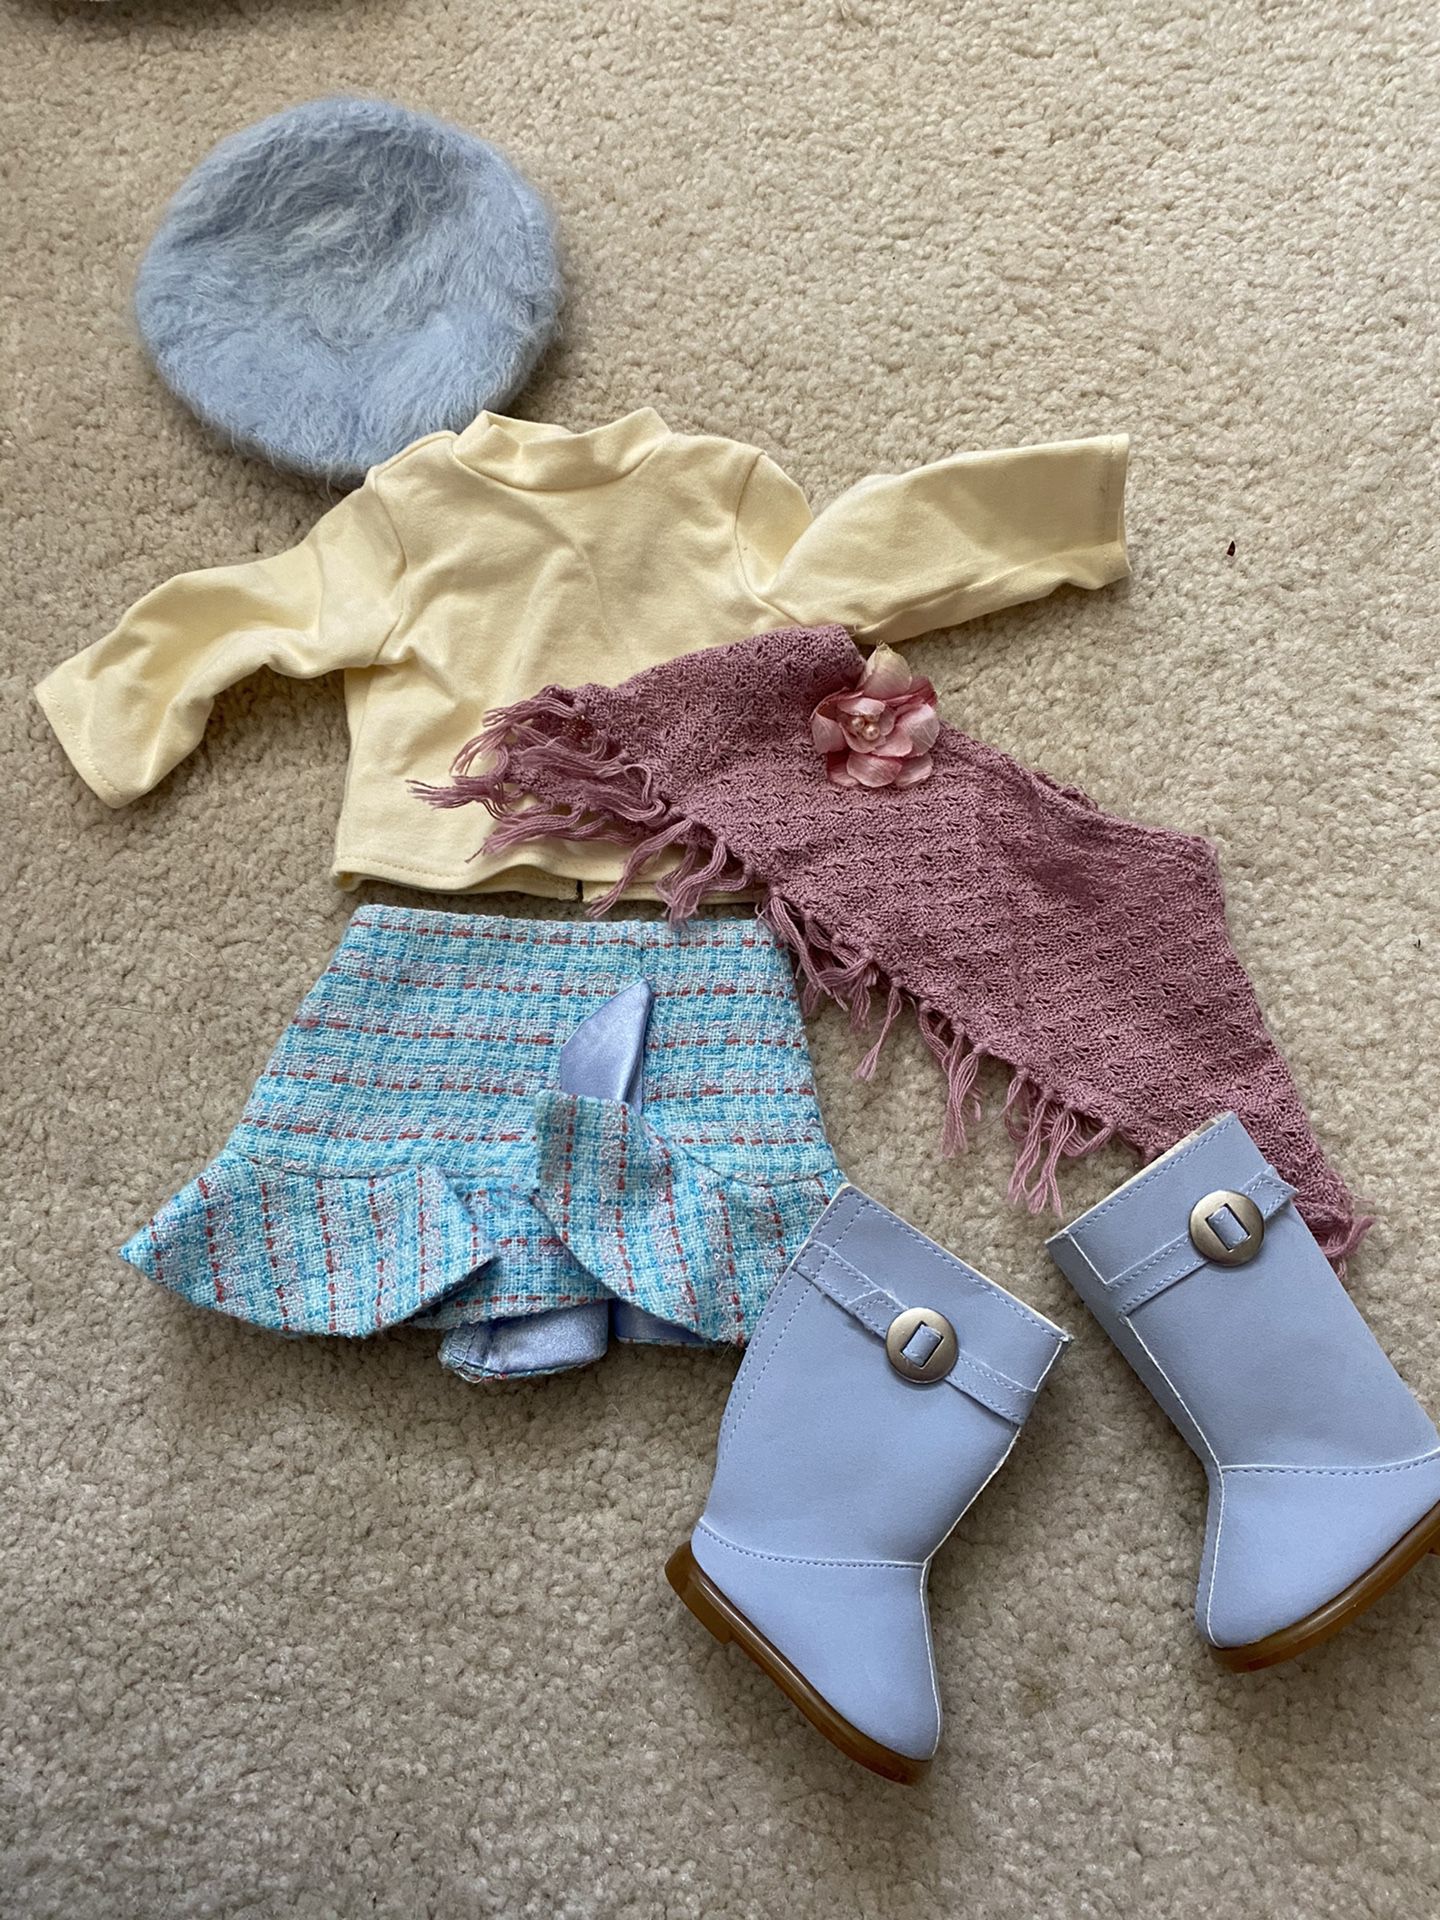 American girl clothes lot! 5 outfits!